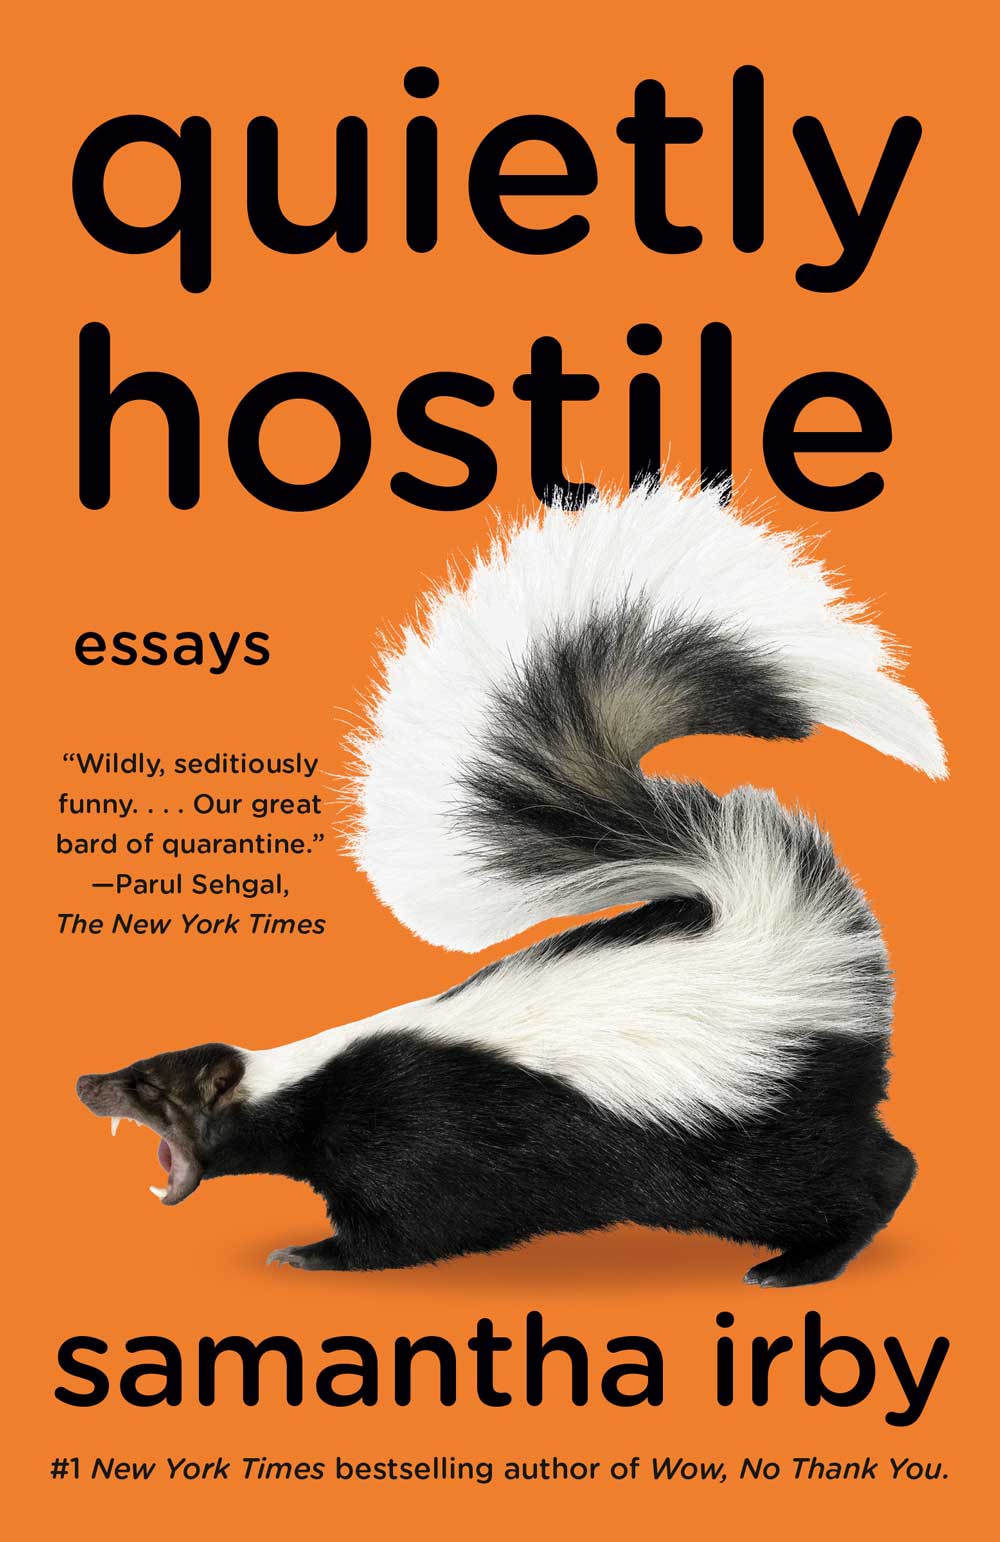 Book cover of Quietly Hostile. An angry skunk with its mouth wide open and eyes shut, against an orange background.